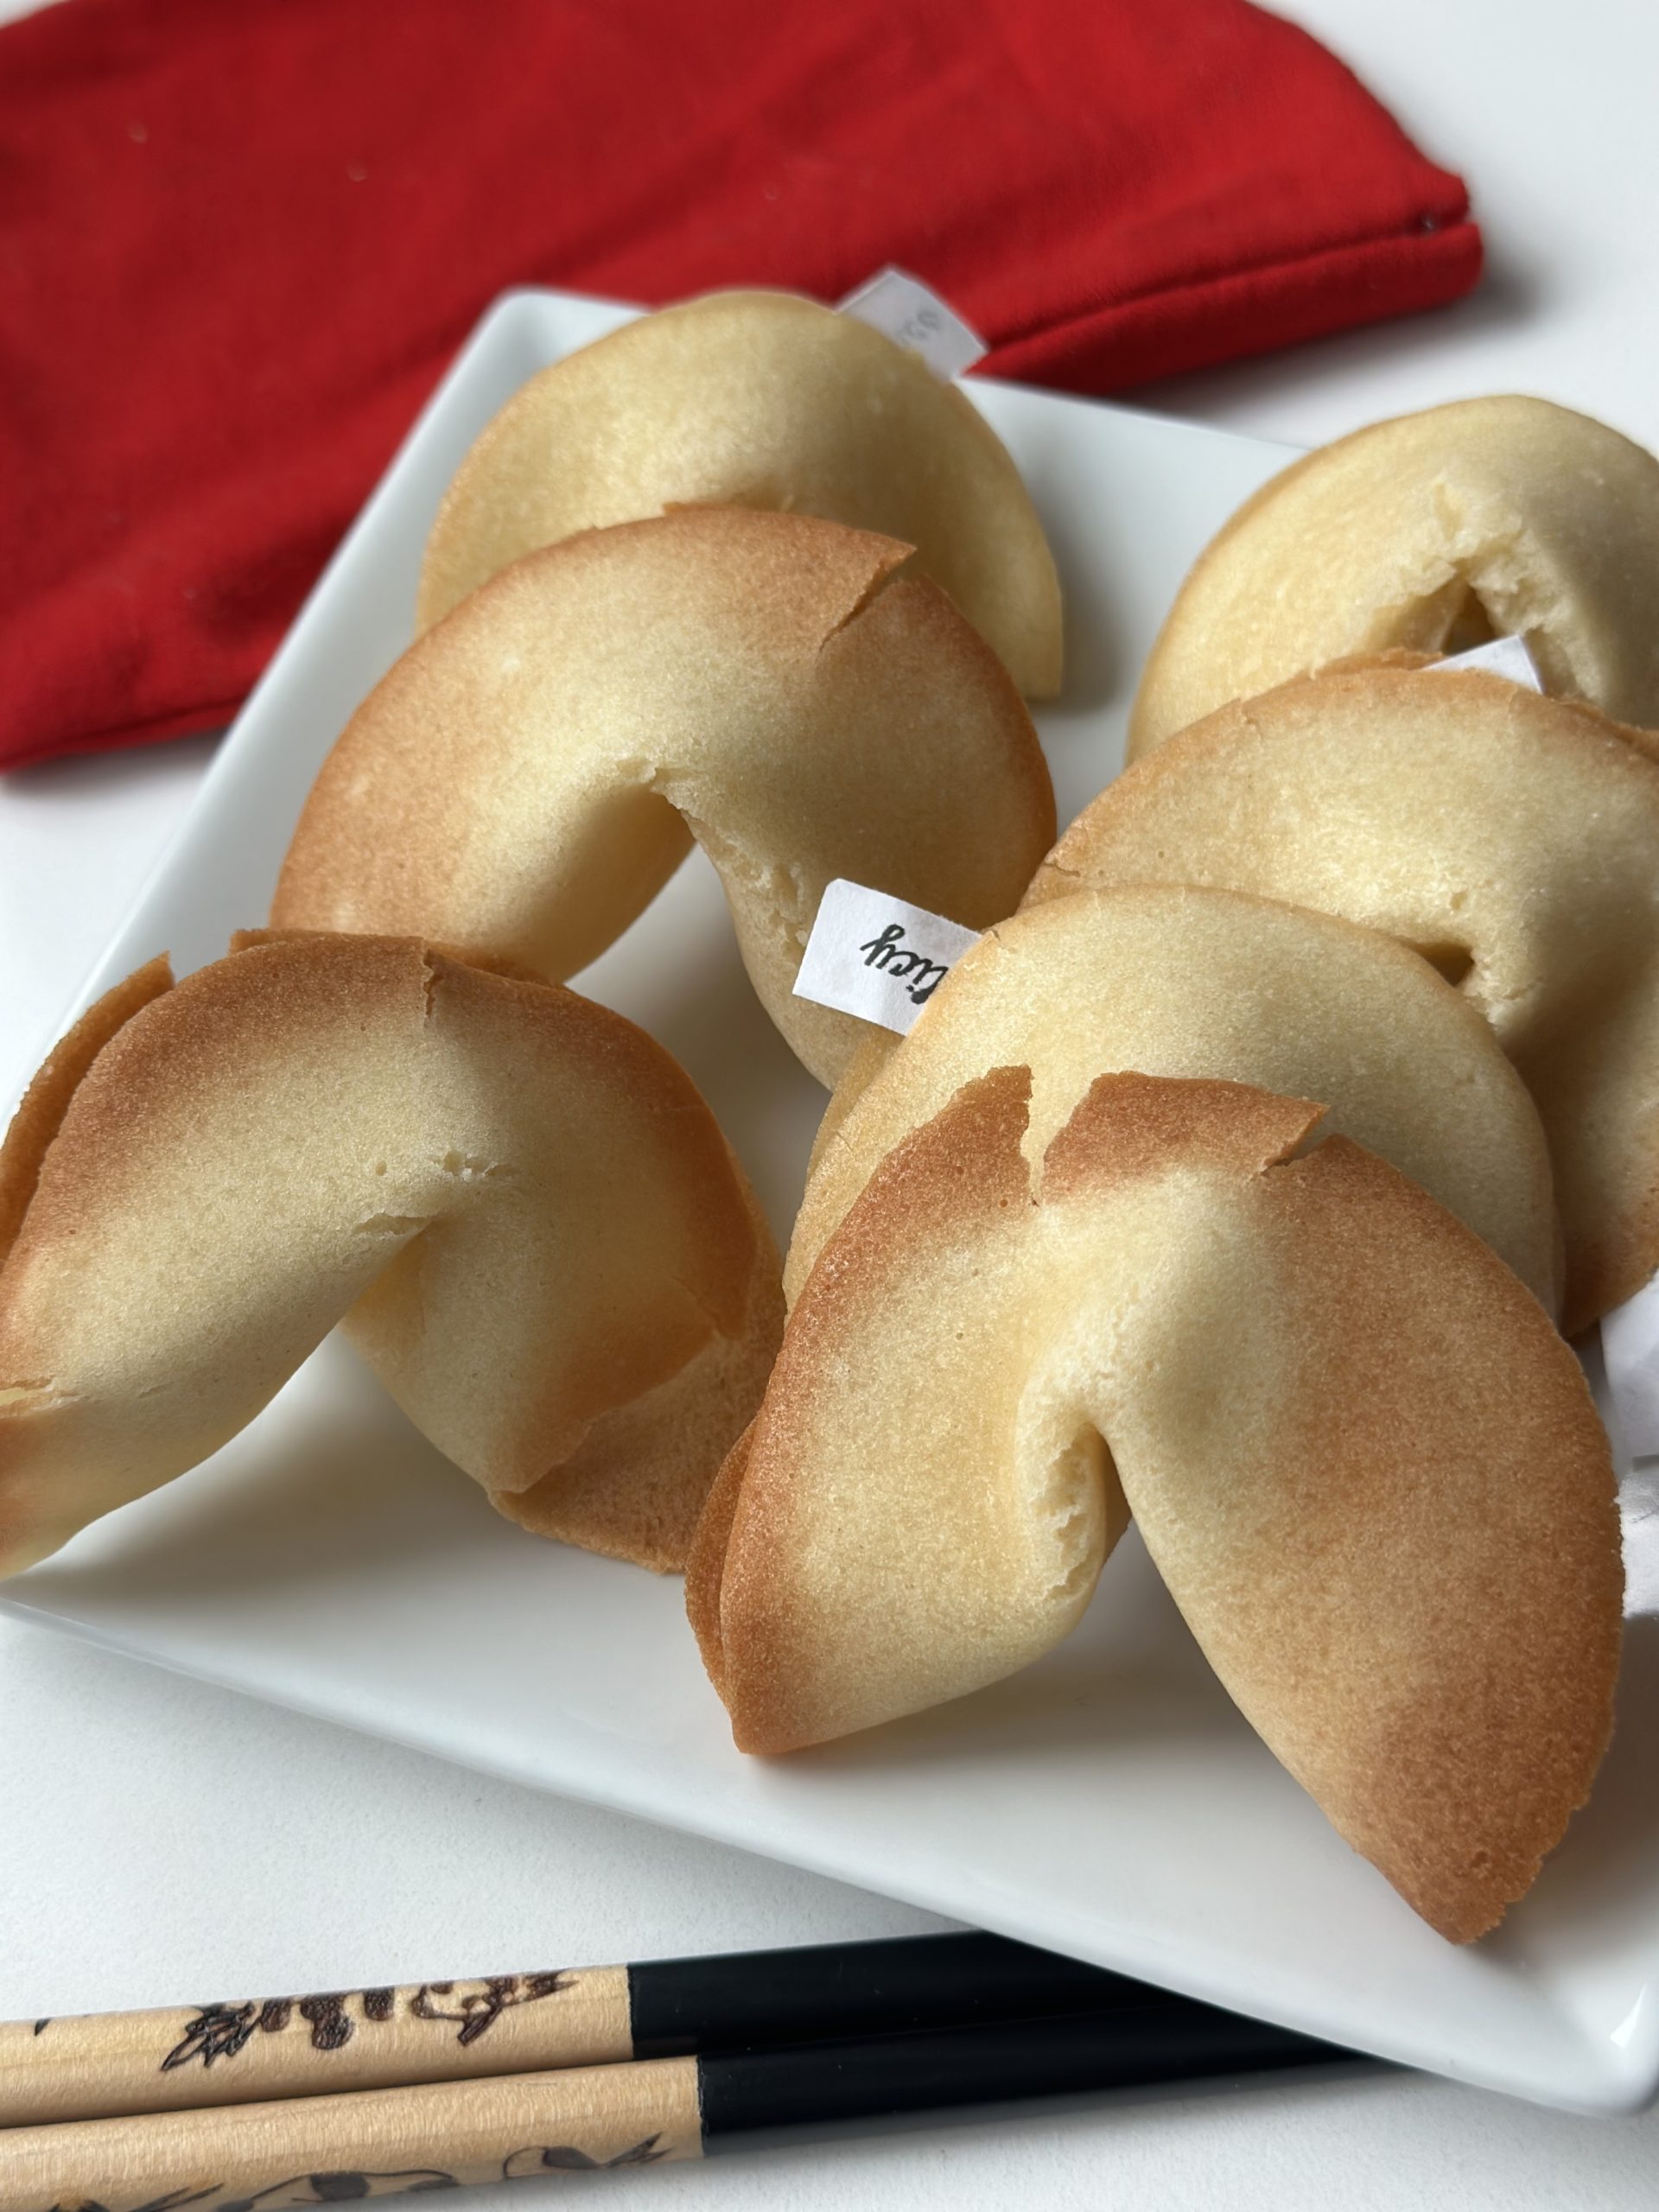 Photo of homemade fortune cookies on a plate with chopsticks